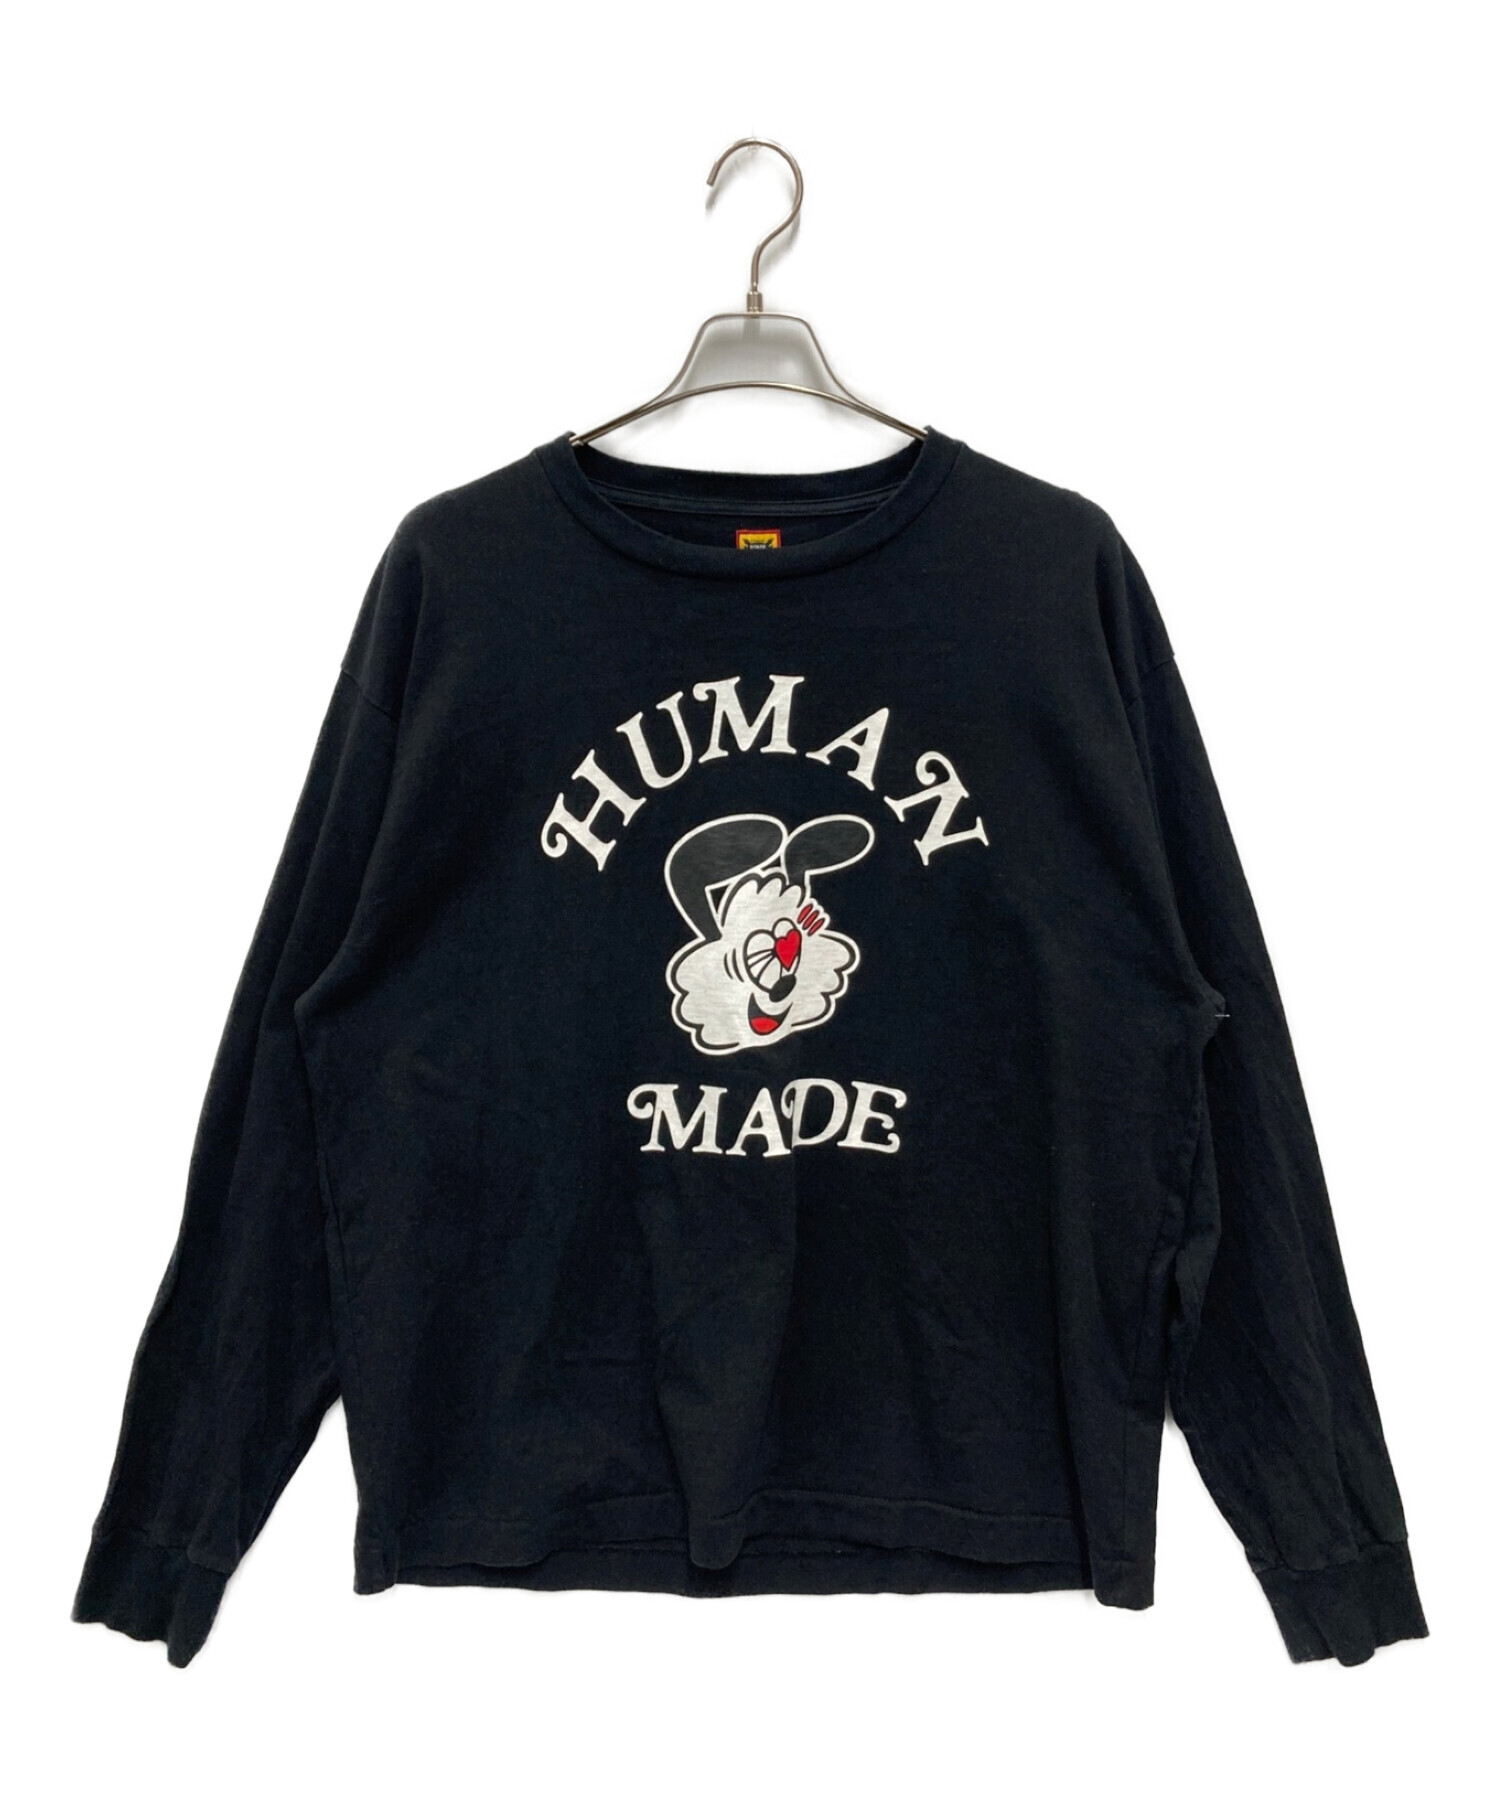 GDC WHITE DAY L/S T-SHIRT 黒 HUMAN MADE